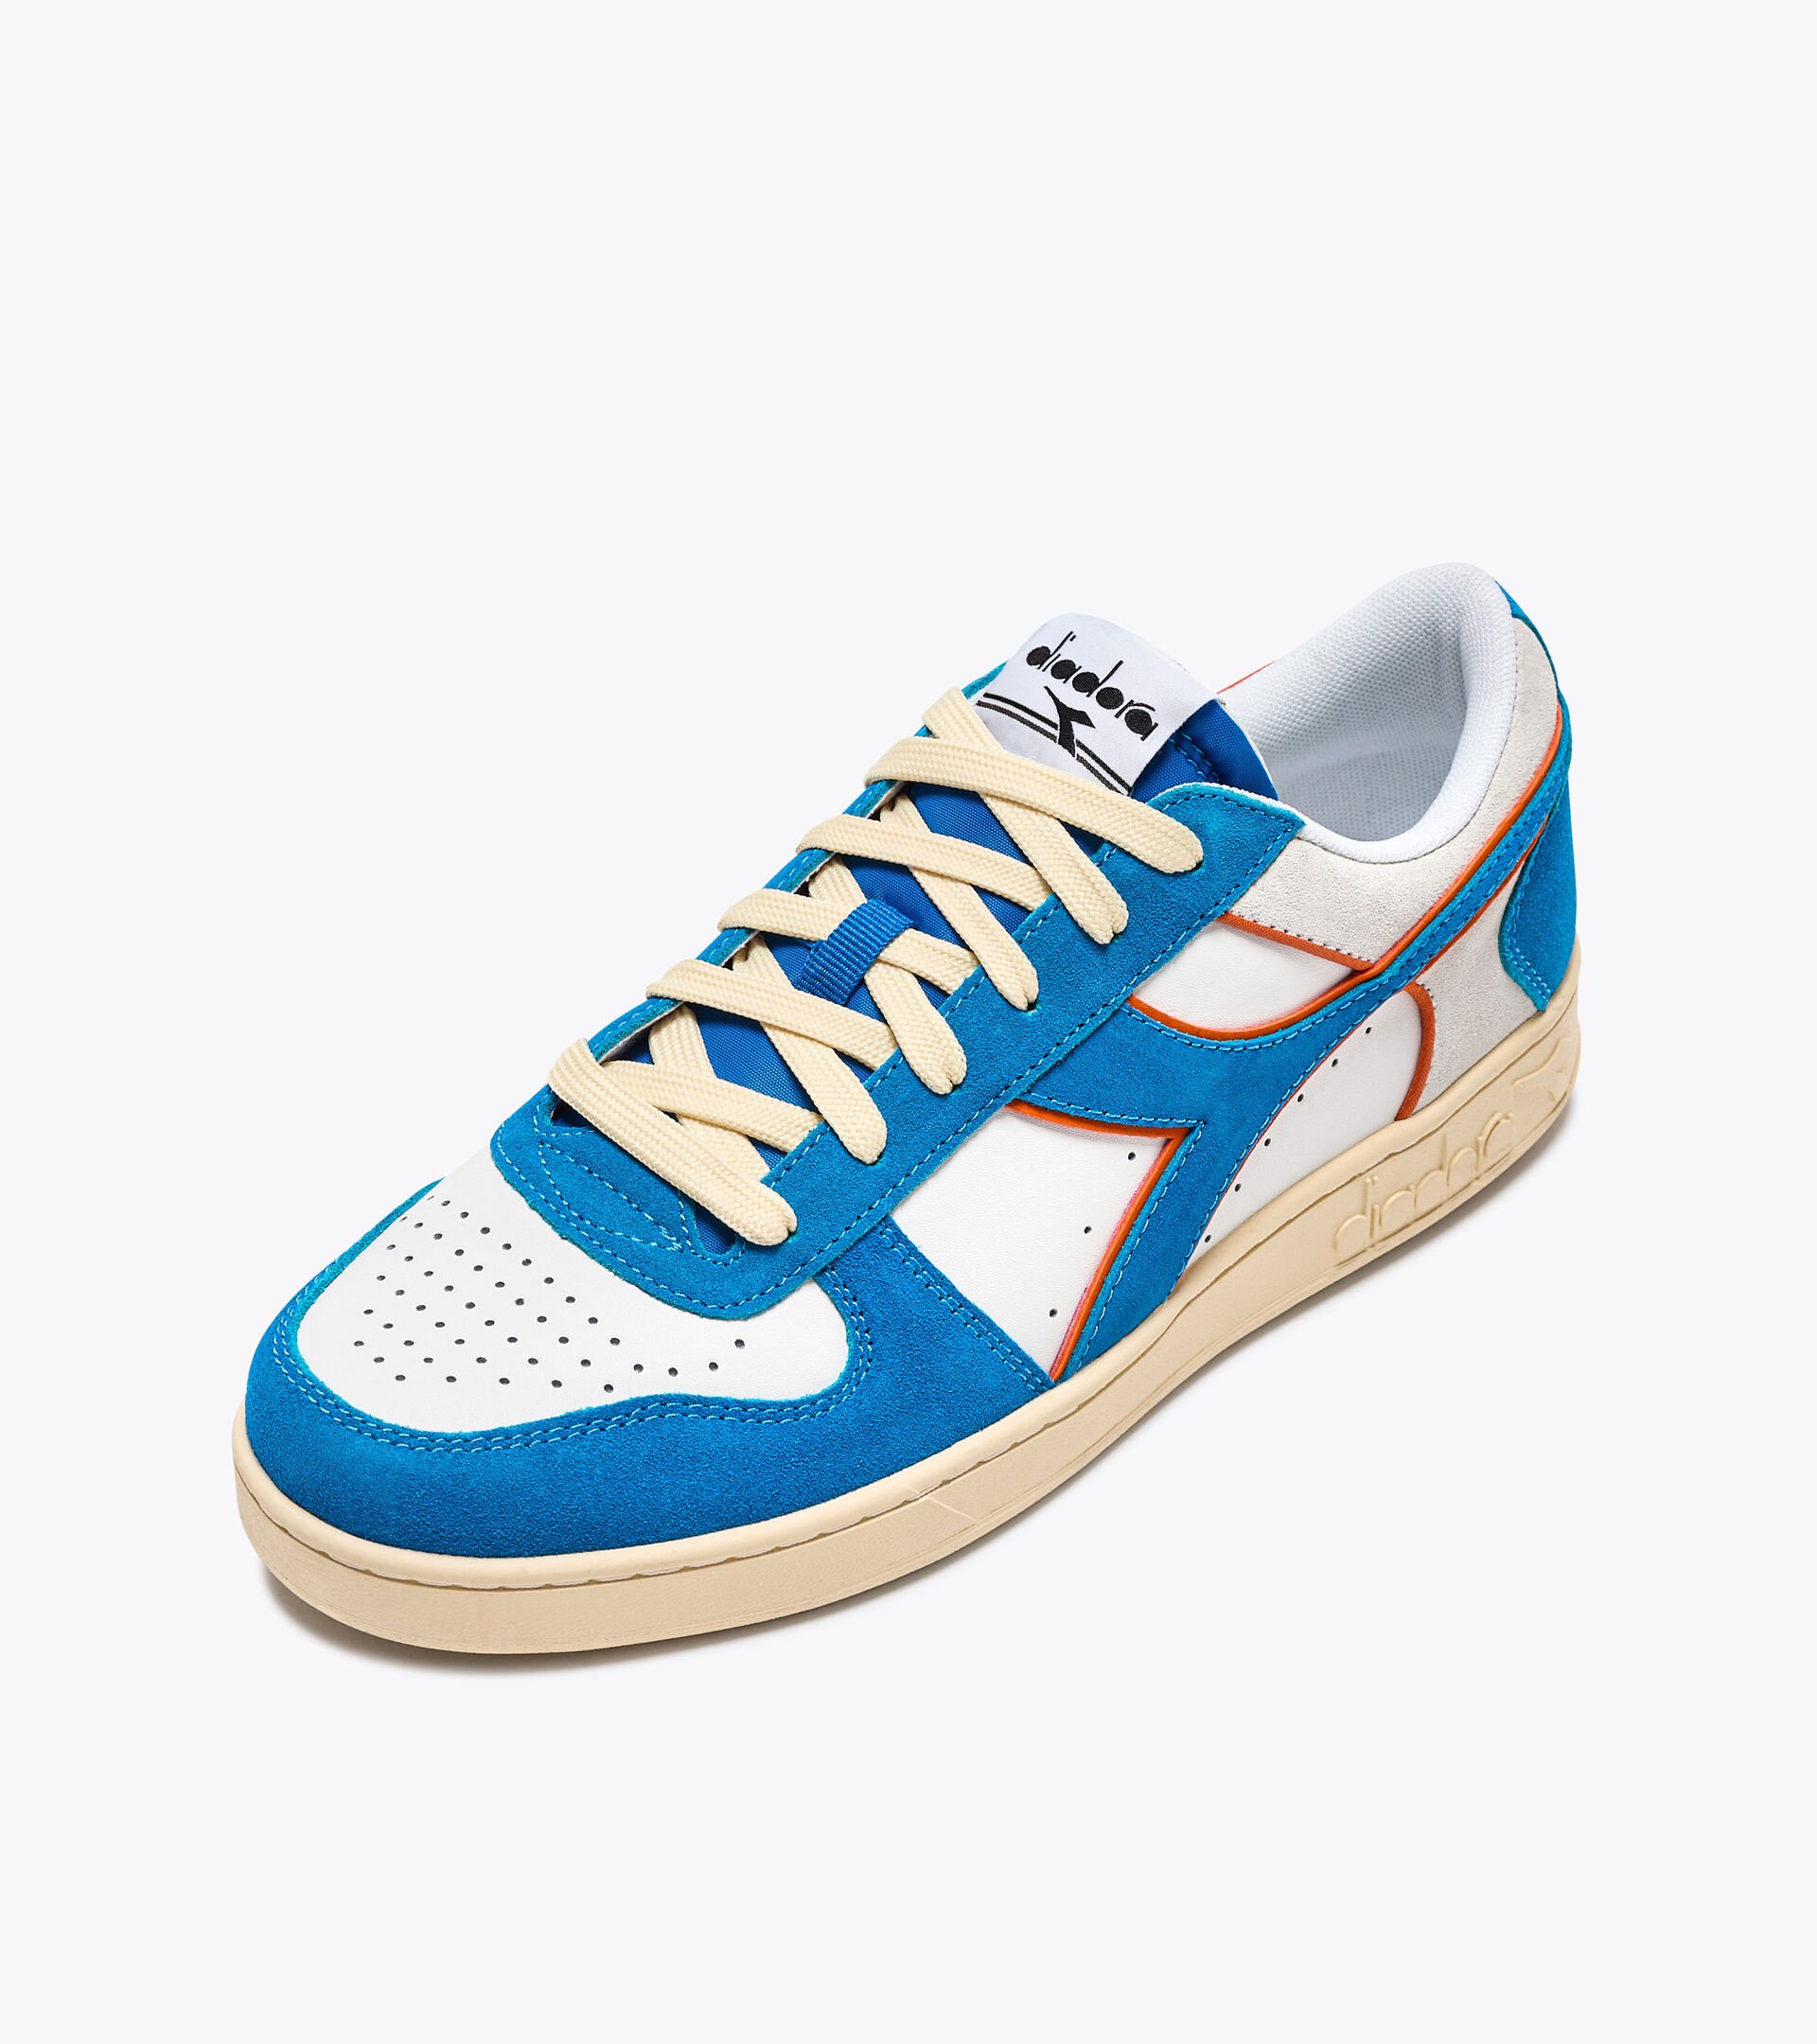 Sporty sneakers - Gender neutral MAGIC BASKET LOW SUEDE LEATHER ROYAL/WHITE - Diadora